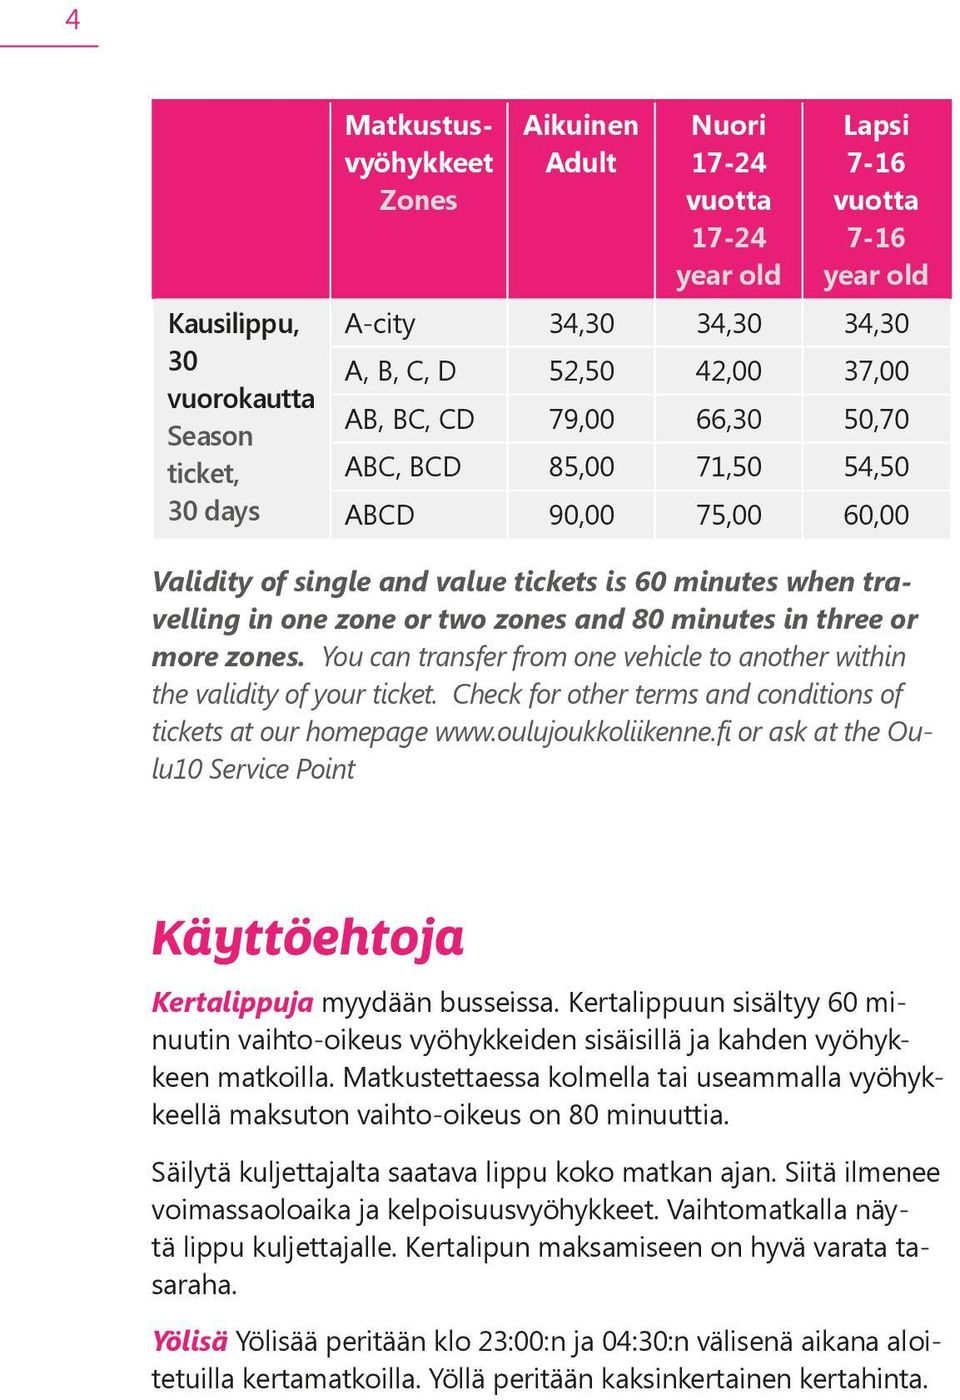 minutes in three or more zones. You can transfer from one vehicle to another within the validity of your ticket. Check for other terms and conditions of tickets at our homepage www.oulujoukkoliikenne.